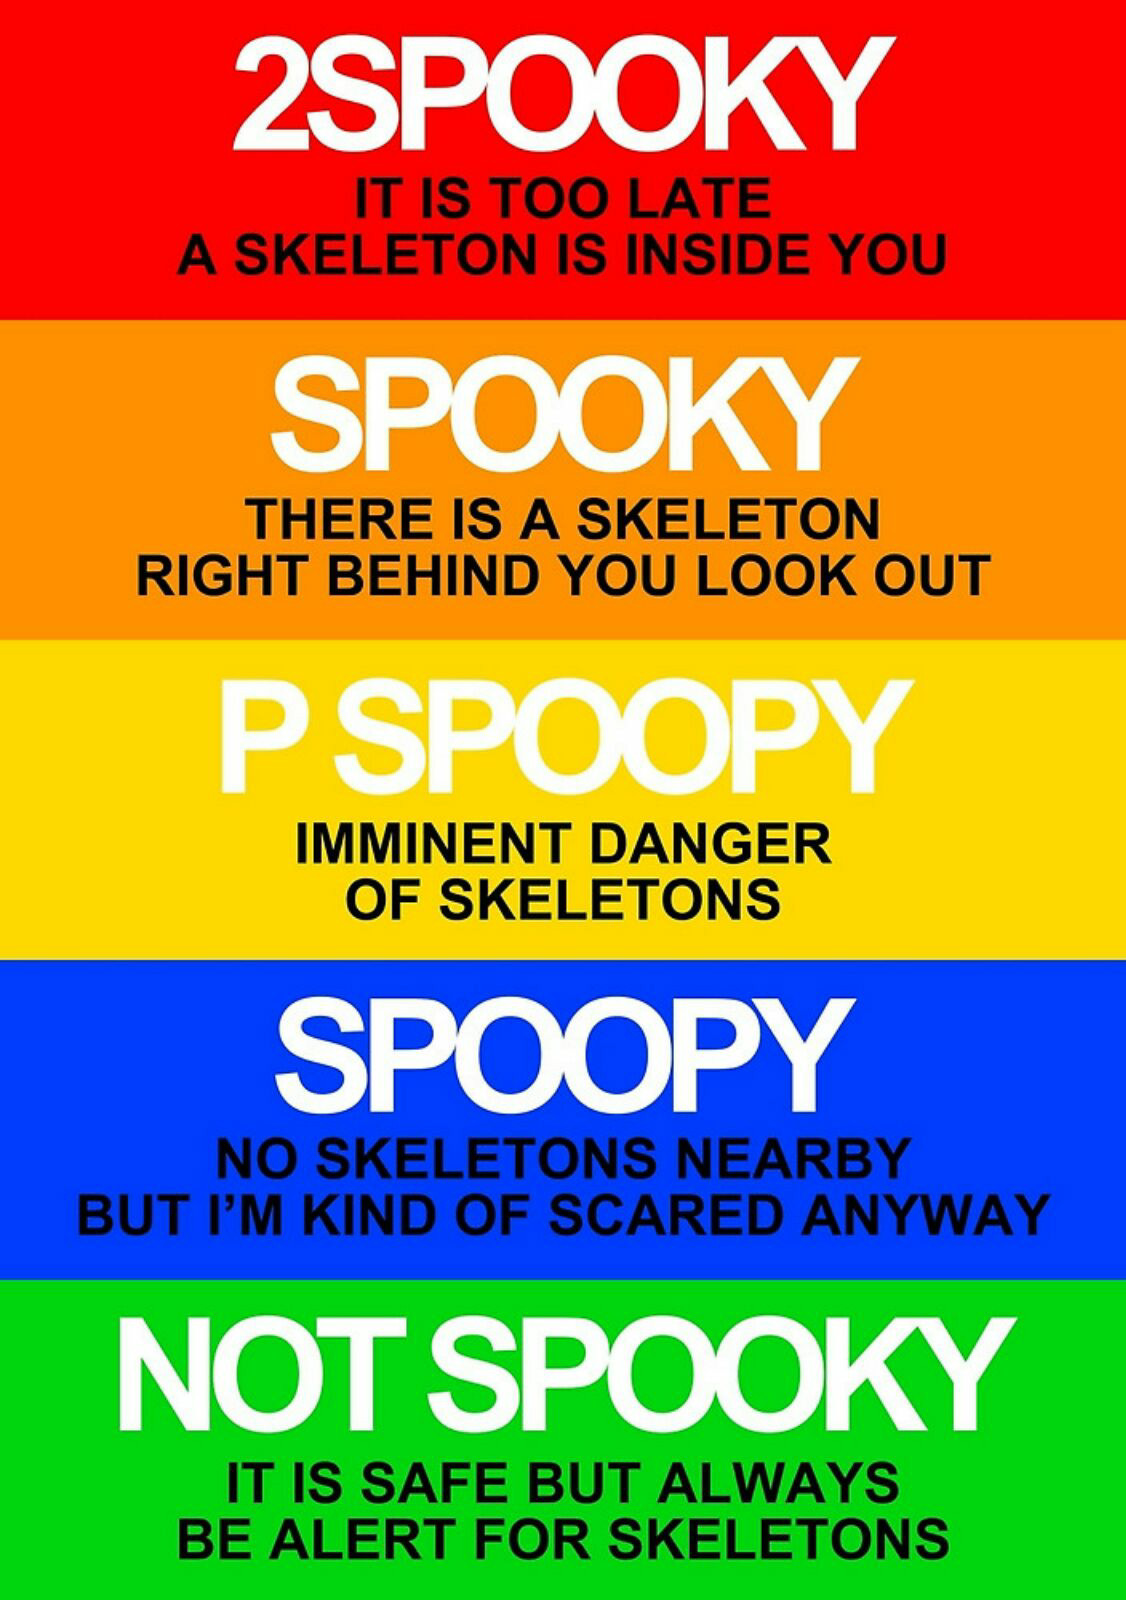 SpoopyScarySkeletons. 5th comment is spooked - meme